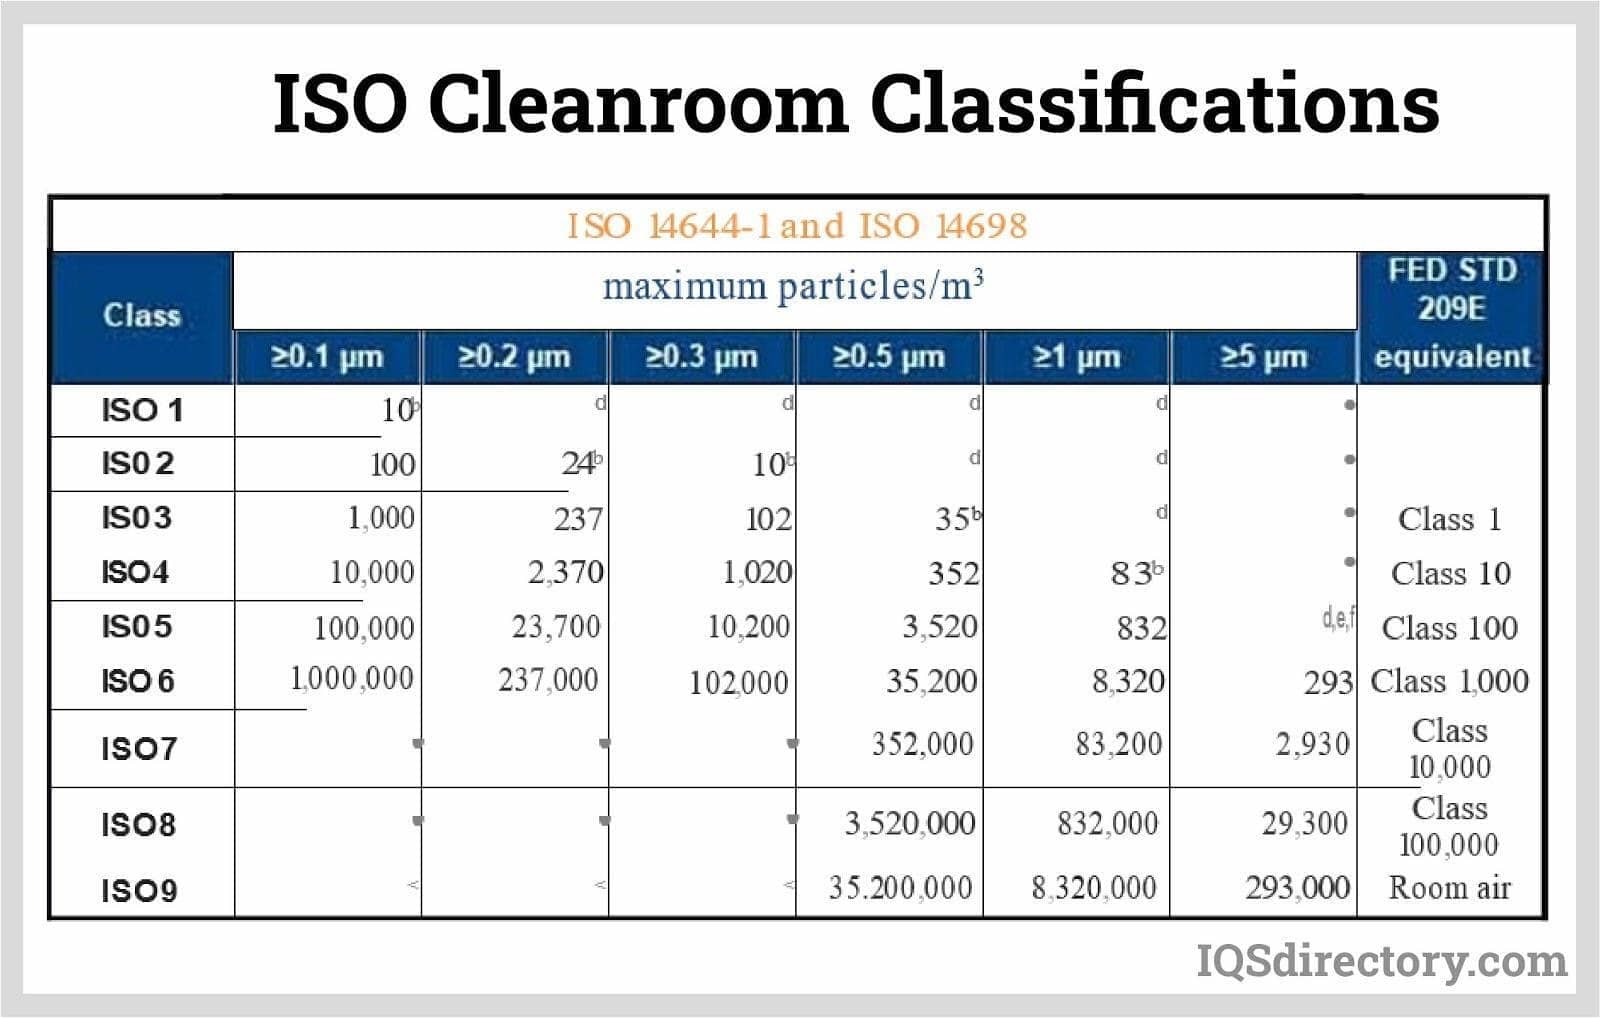 ISO Cleanroom Classifications